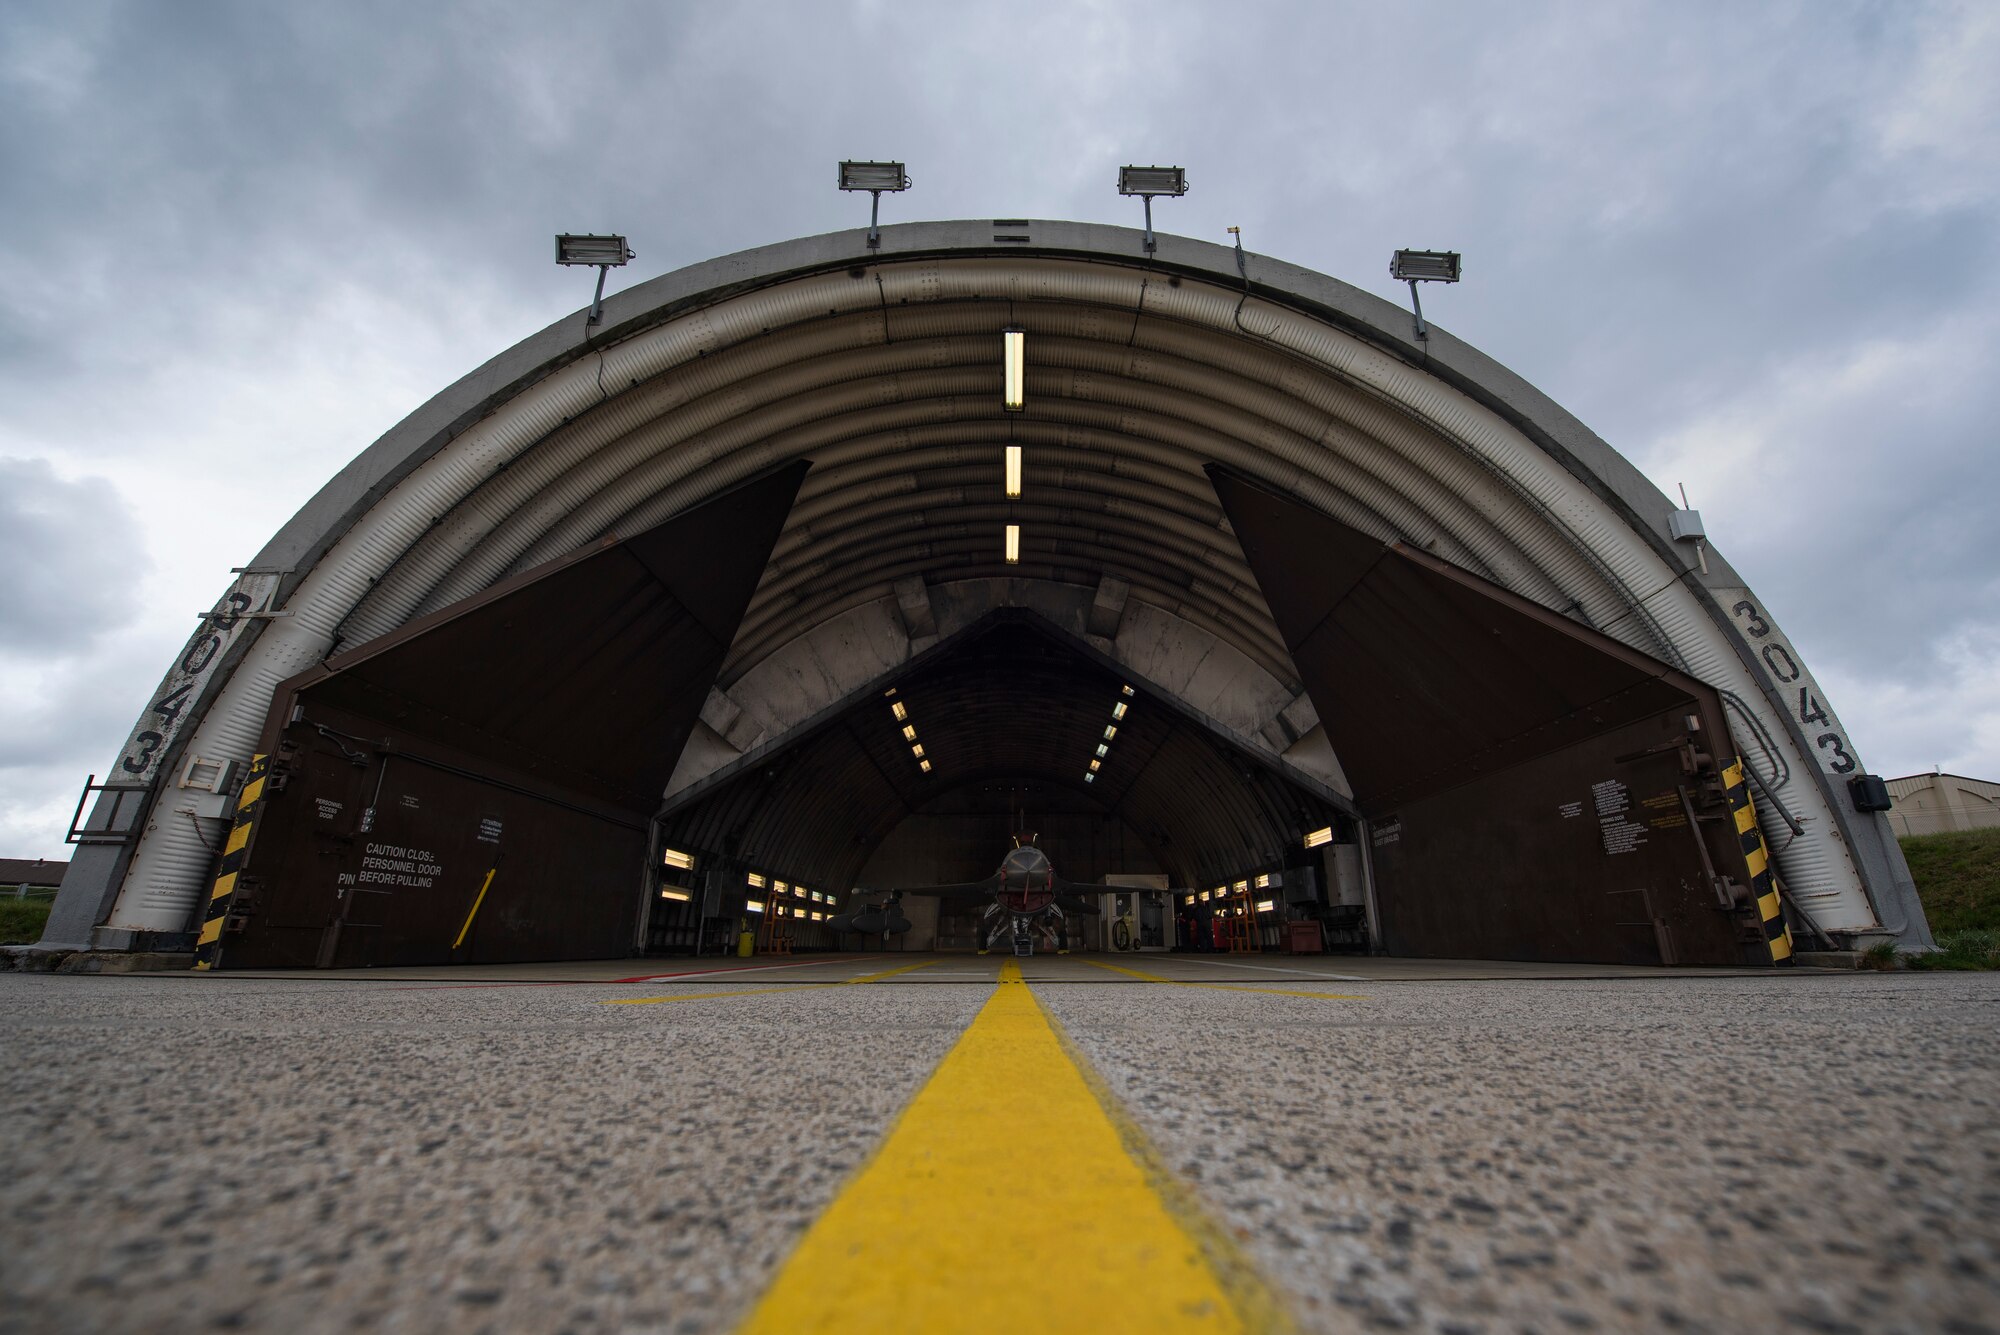 A U.S. Air Force F-16 Fighting Falcon assigned to the 480th Fighter Squadron sits in a hardened aircraft shelter at Spangdahlem Air Base, Germany, April 3, 2019. The F-16 is a highly maneuverable multi-role fighter aircraft used to support Spangdahlem's mission of airpower deterrence and readiness. (U.S. Air Force photo by Airman 1st Class Valerie Seelye)